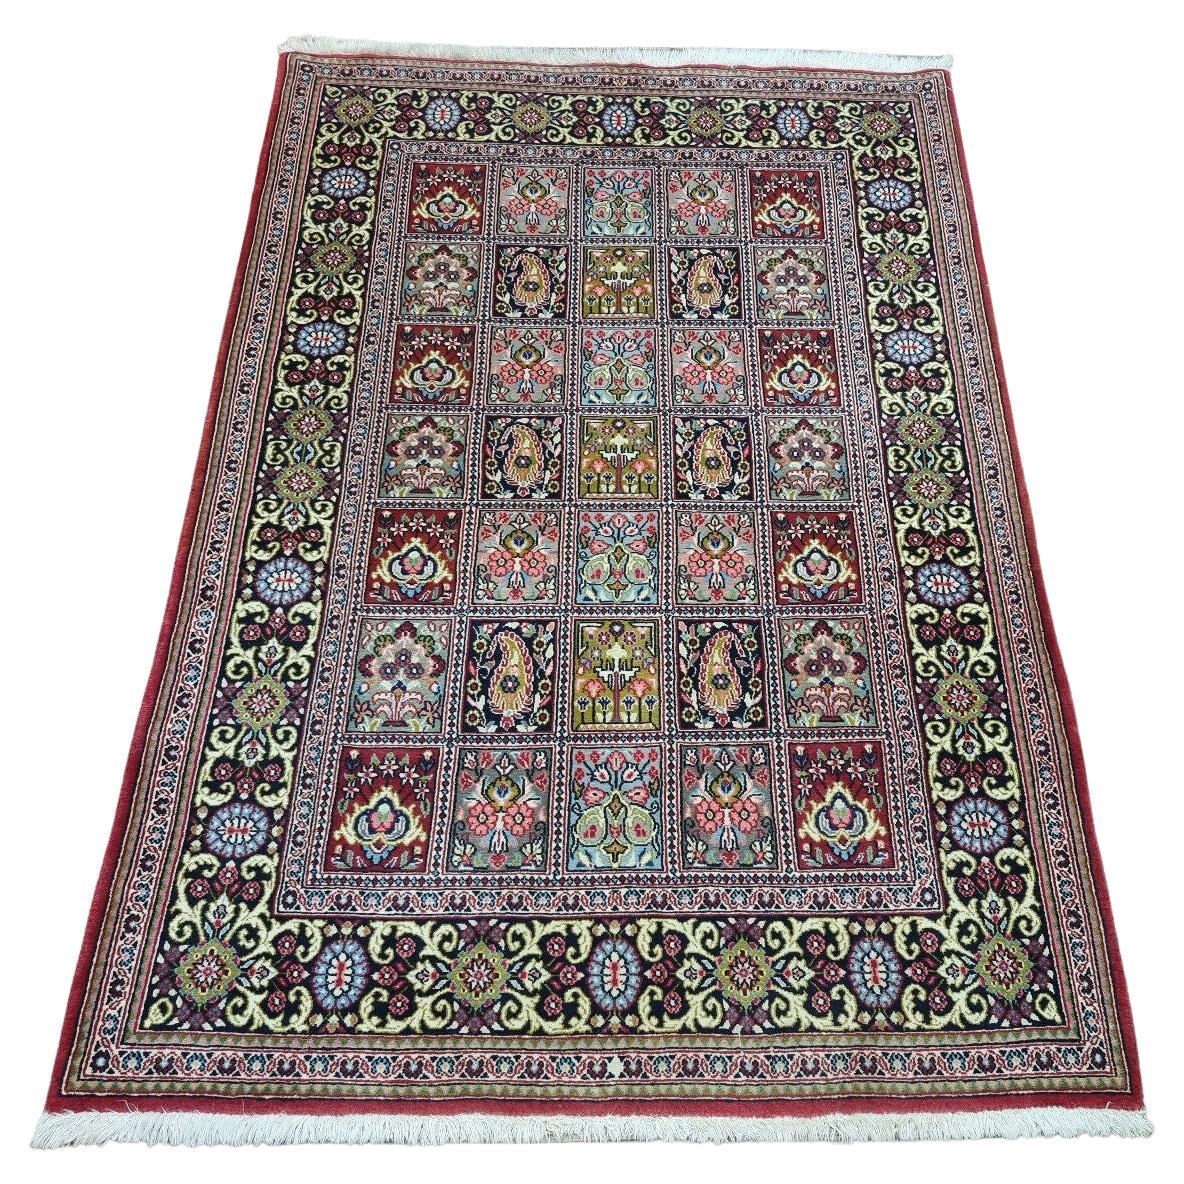 Handmade Vintage Persian Style Qum Rug 3.6' x 5.1', 1970s - 1D87 For Sale